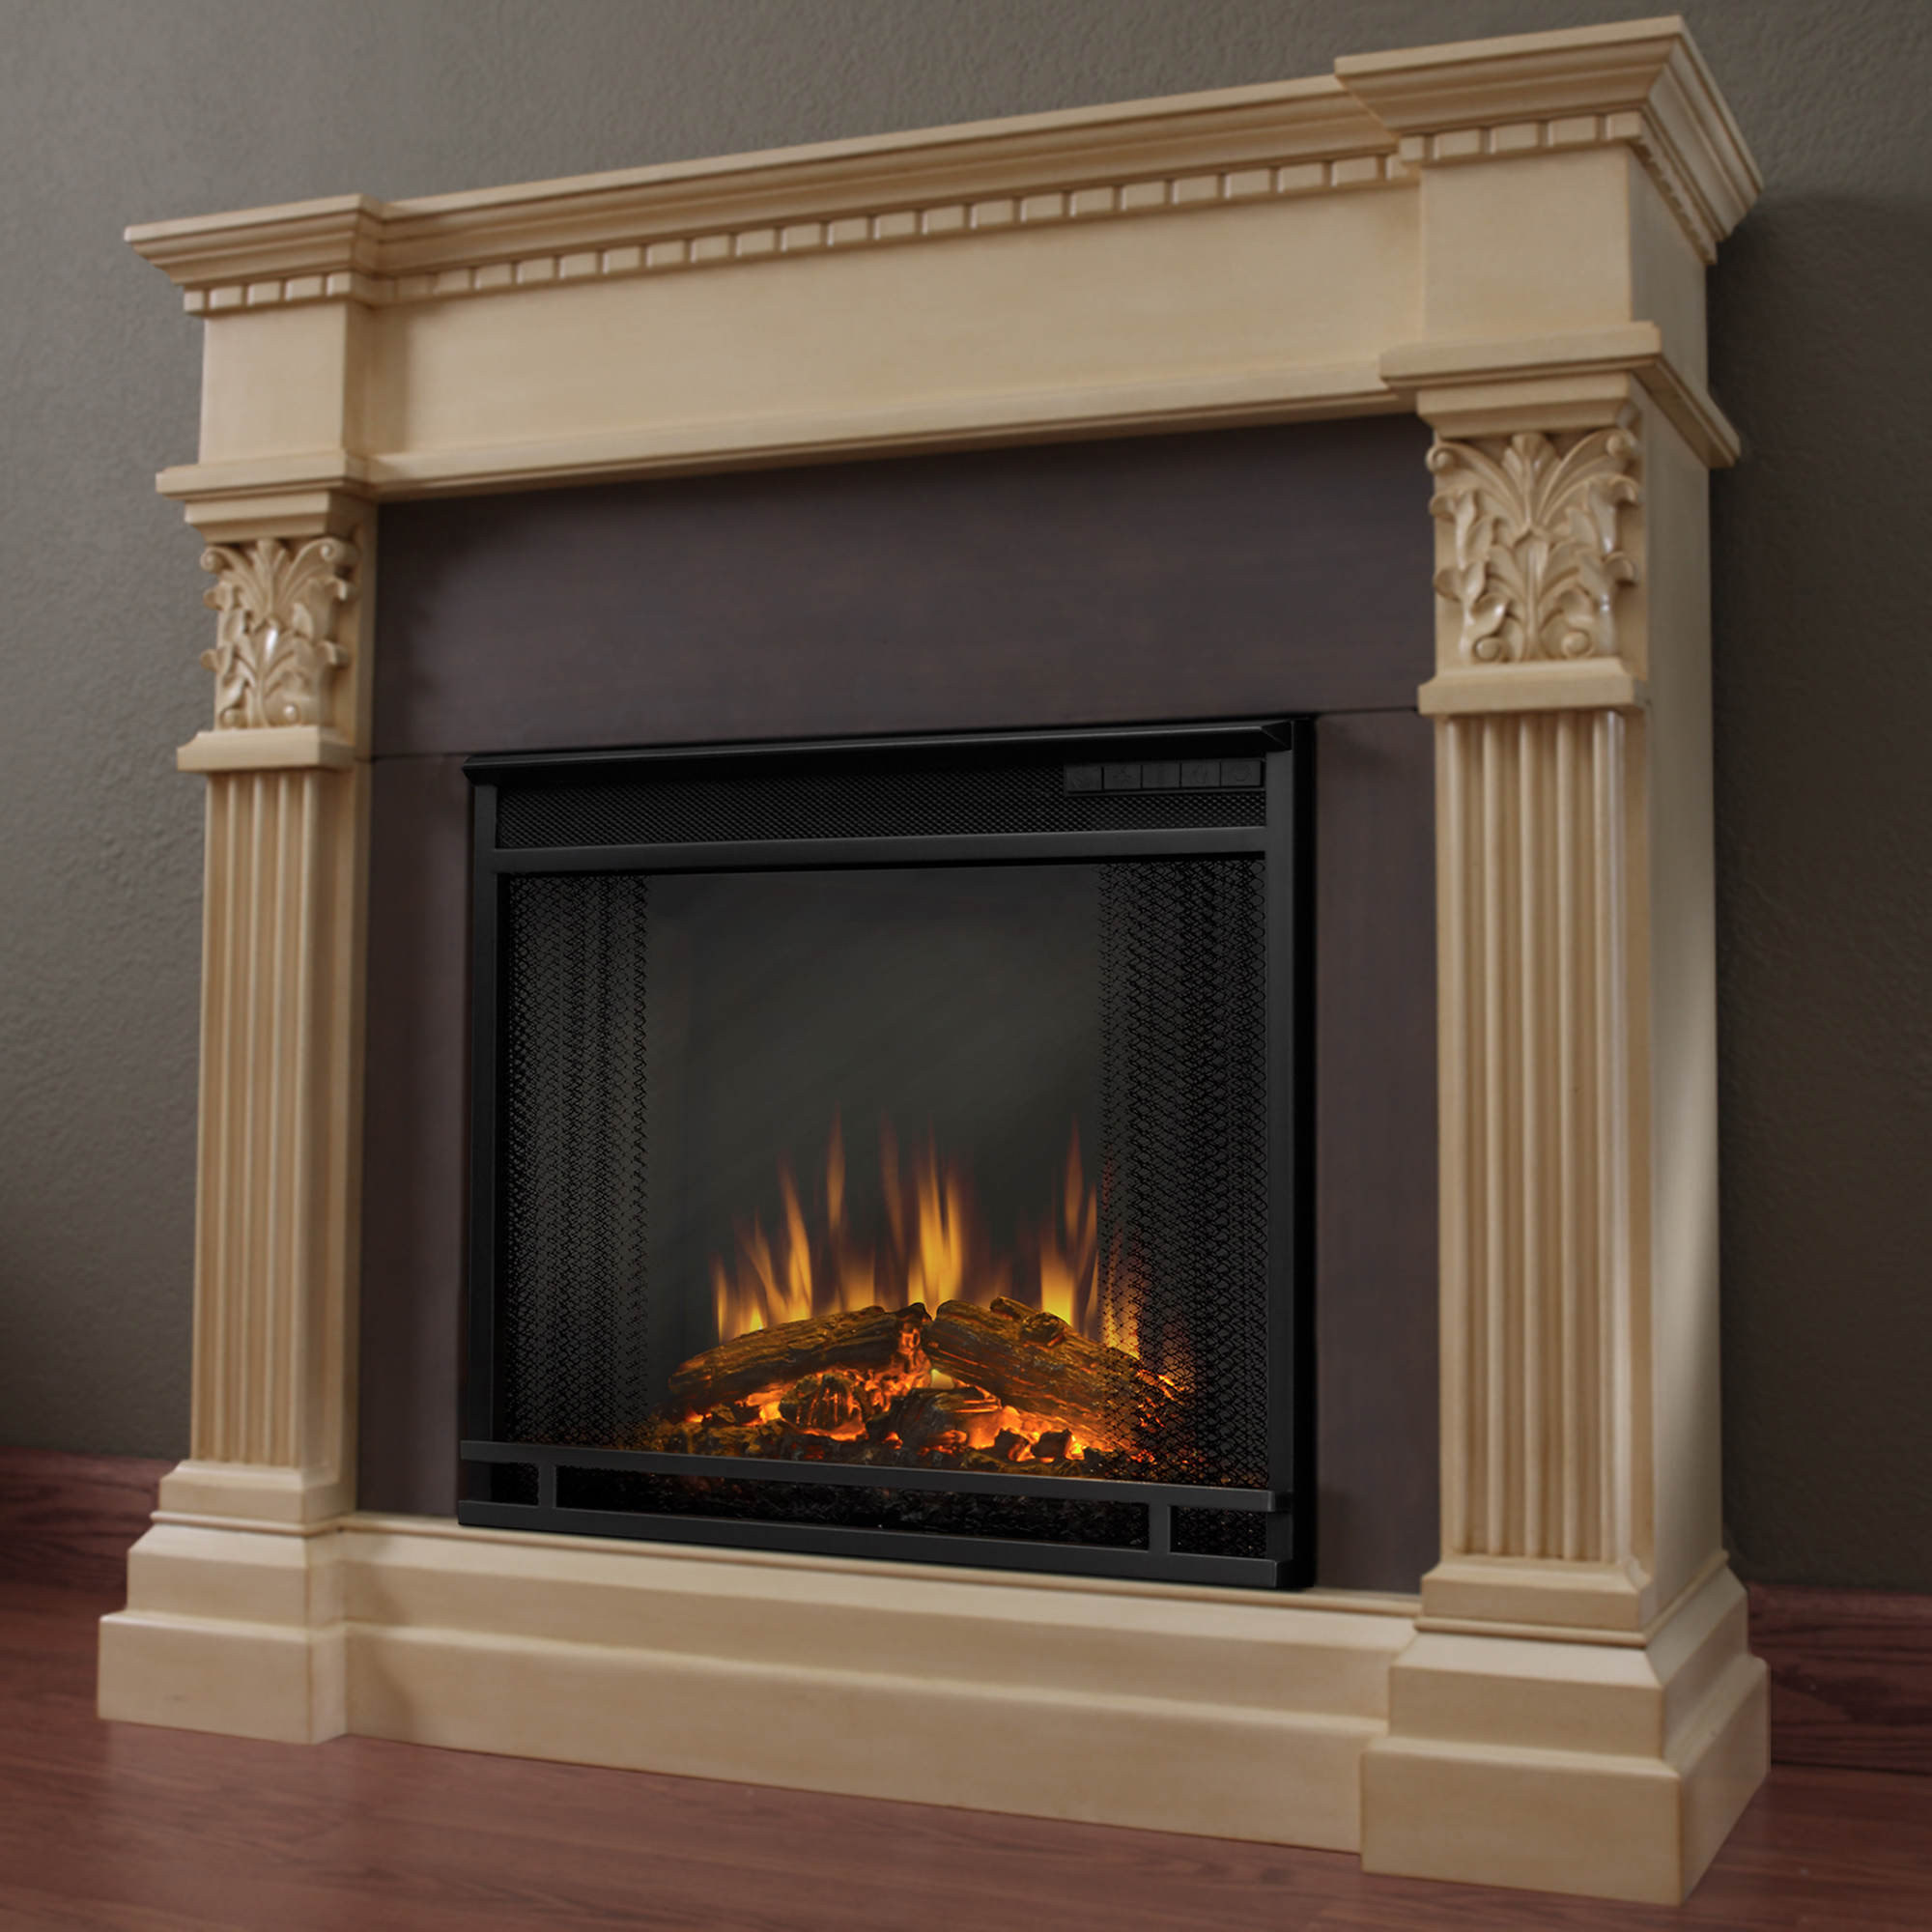 Bjs Electric Fireplace
 Real Flame Gabrielle Electric Fireplace Antique White